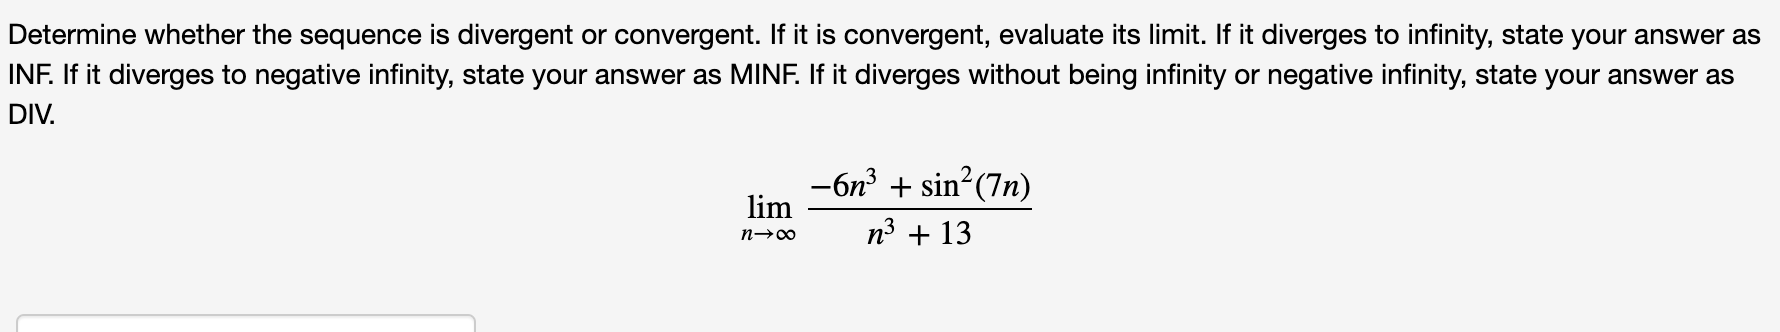 Determine whether the sequence is divergent or convergent. If it is convergent, evaluate its limit. If it diverges to infinity, state your answer as
INF. If it diverges to negative infinity, state your answer as MINF. If it diverges without being infinity or negative infinity, state your answer as
DIV.
-6n + sin?(7n)
lim
n3 + 13
